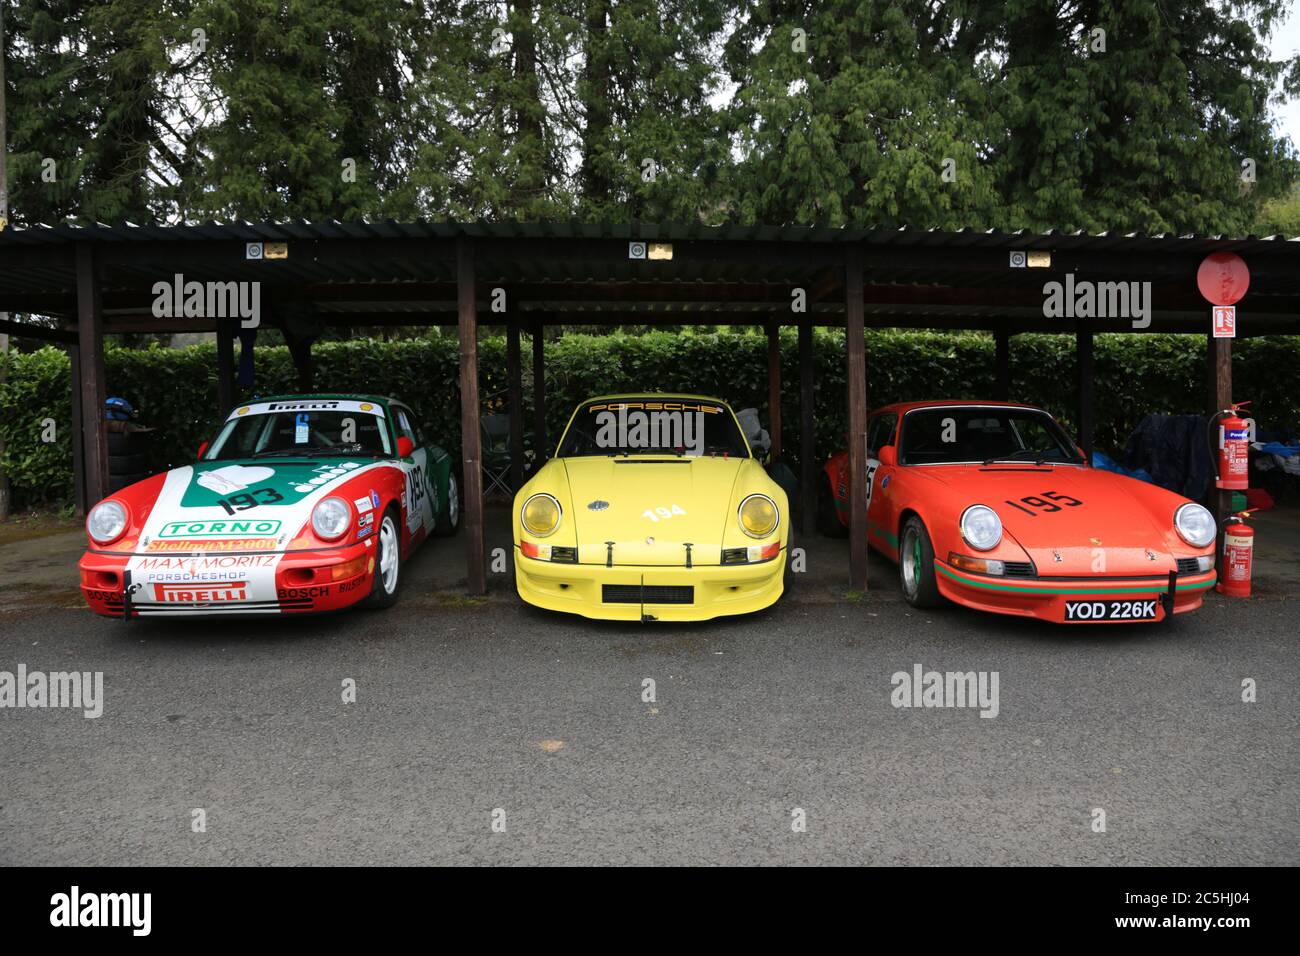 Three Porsche 911's parked in the paddock at Shelsley Walsh speed hill climb, Worcestershire, England, UK. Stock Photo